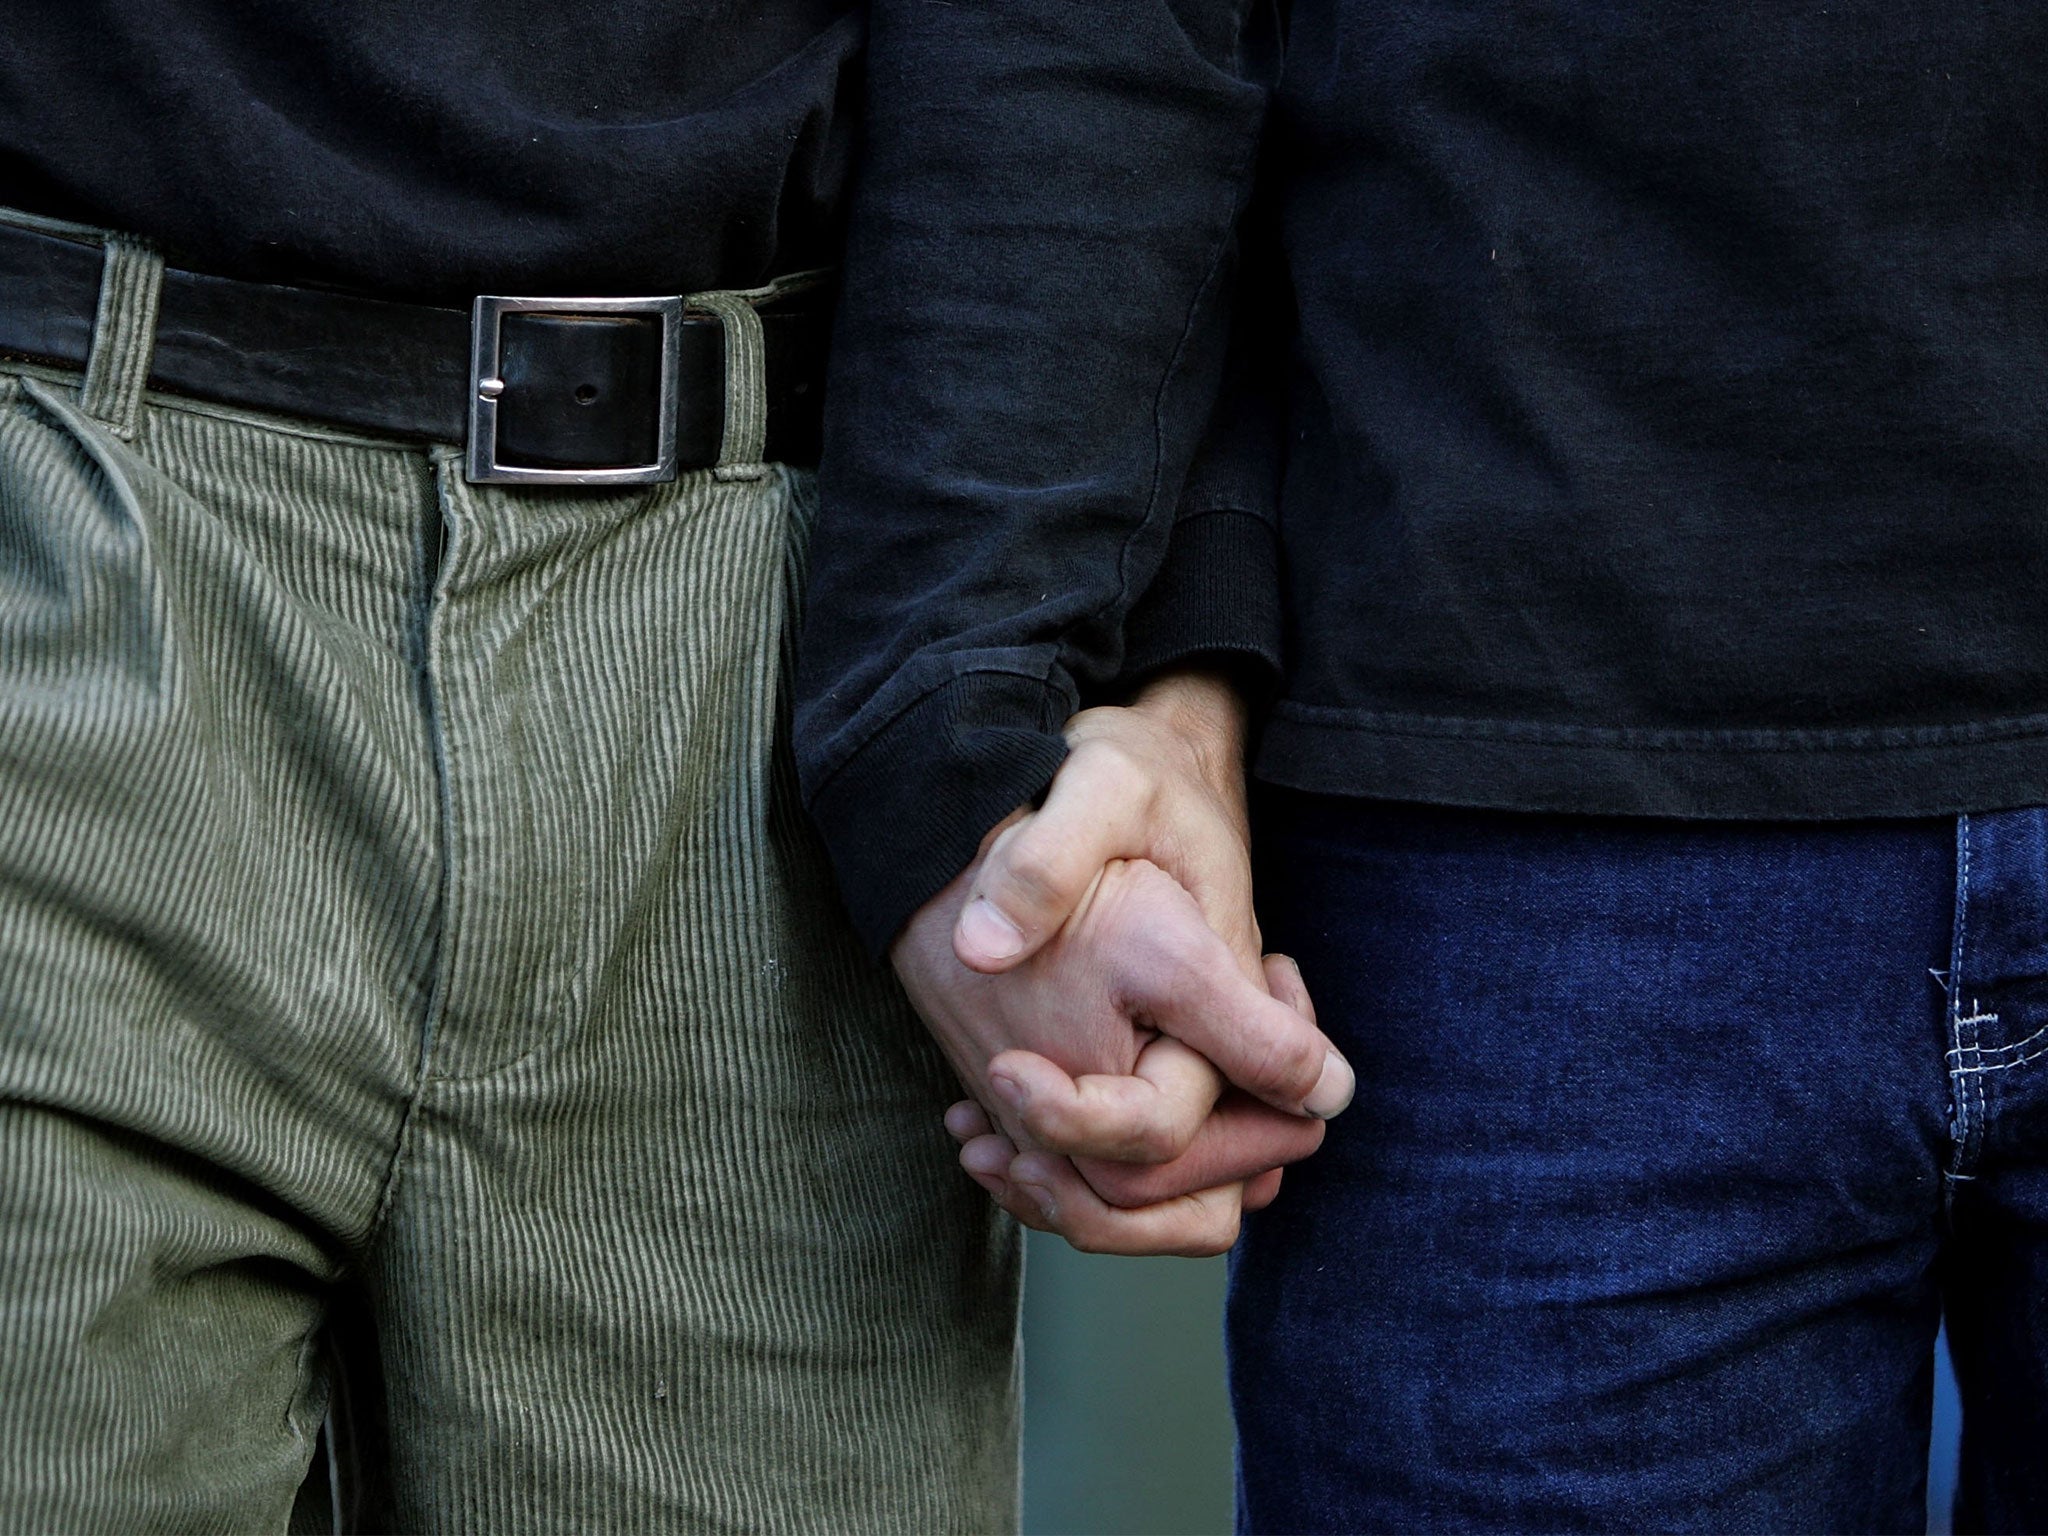 New rules will mean same-sex partners will not be able to have their children baptised in the church